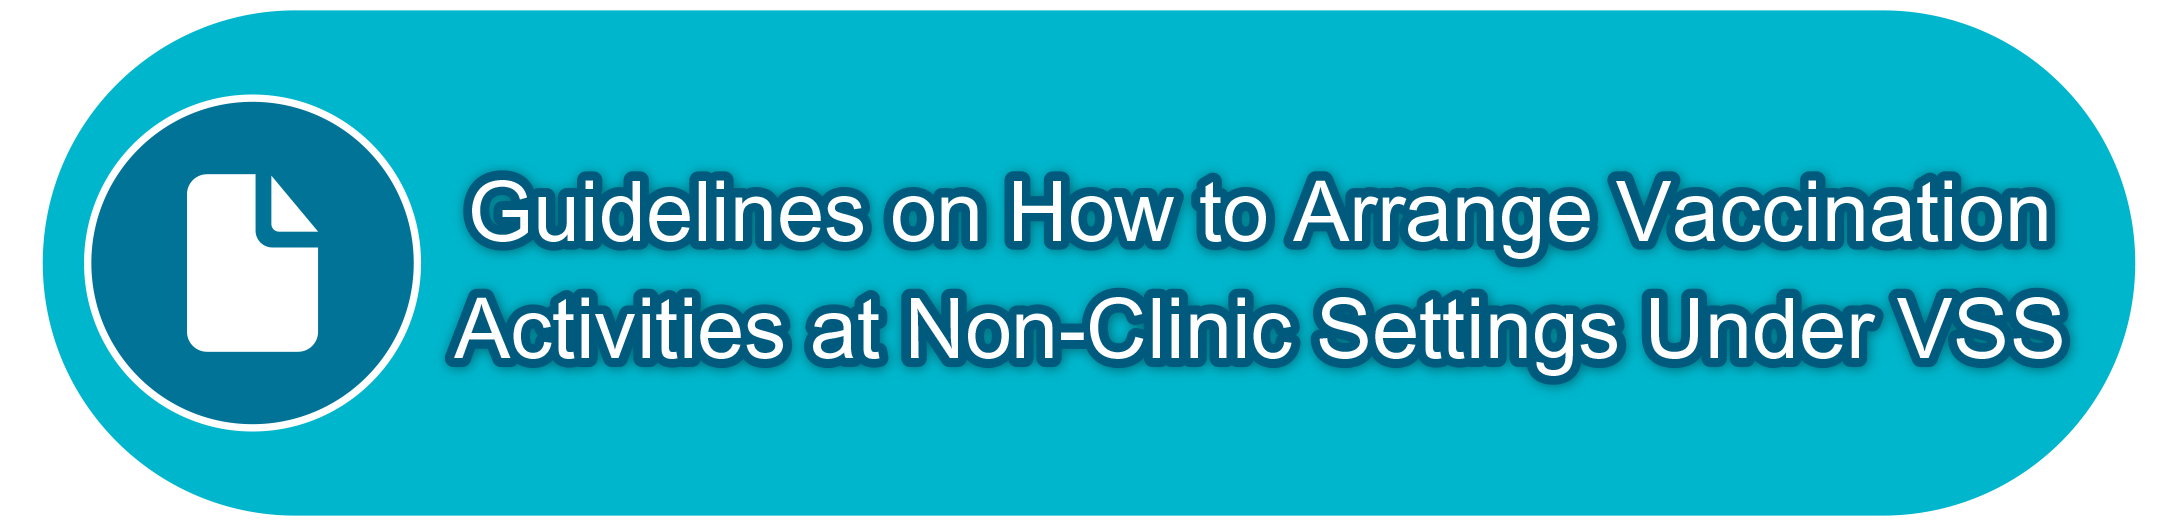 Guidelines on How to Arrange Vaccination Activities at Non-Clinic Settings Under VSS